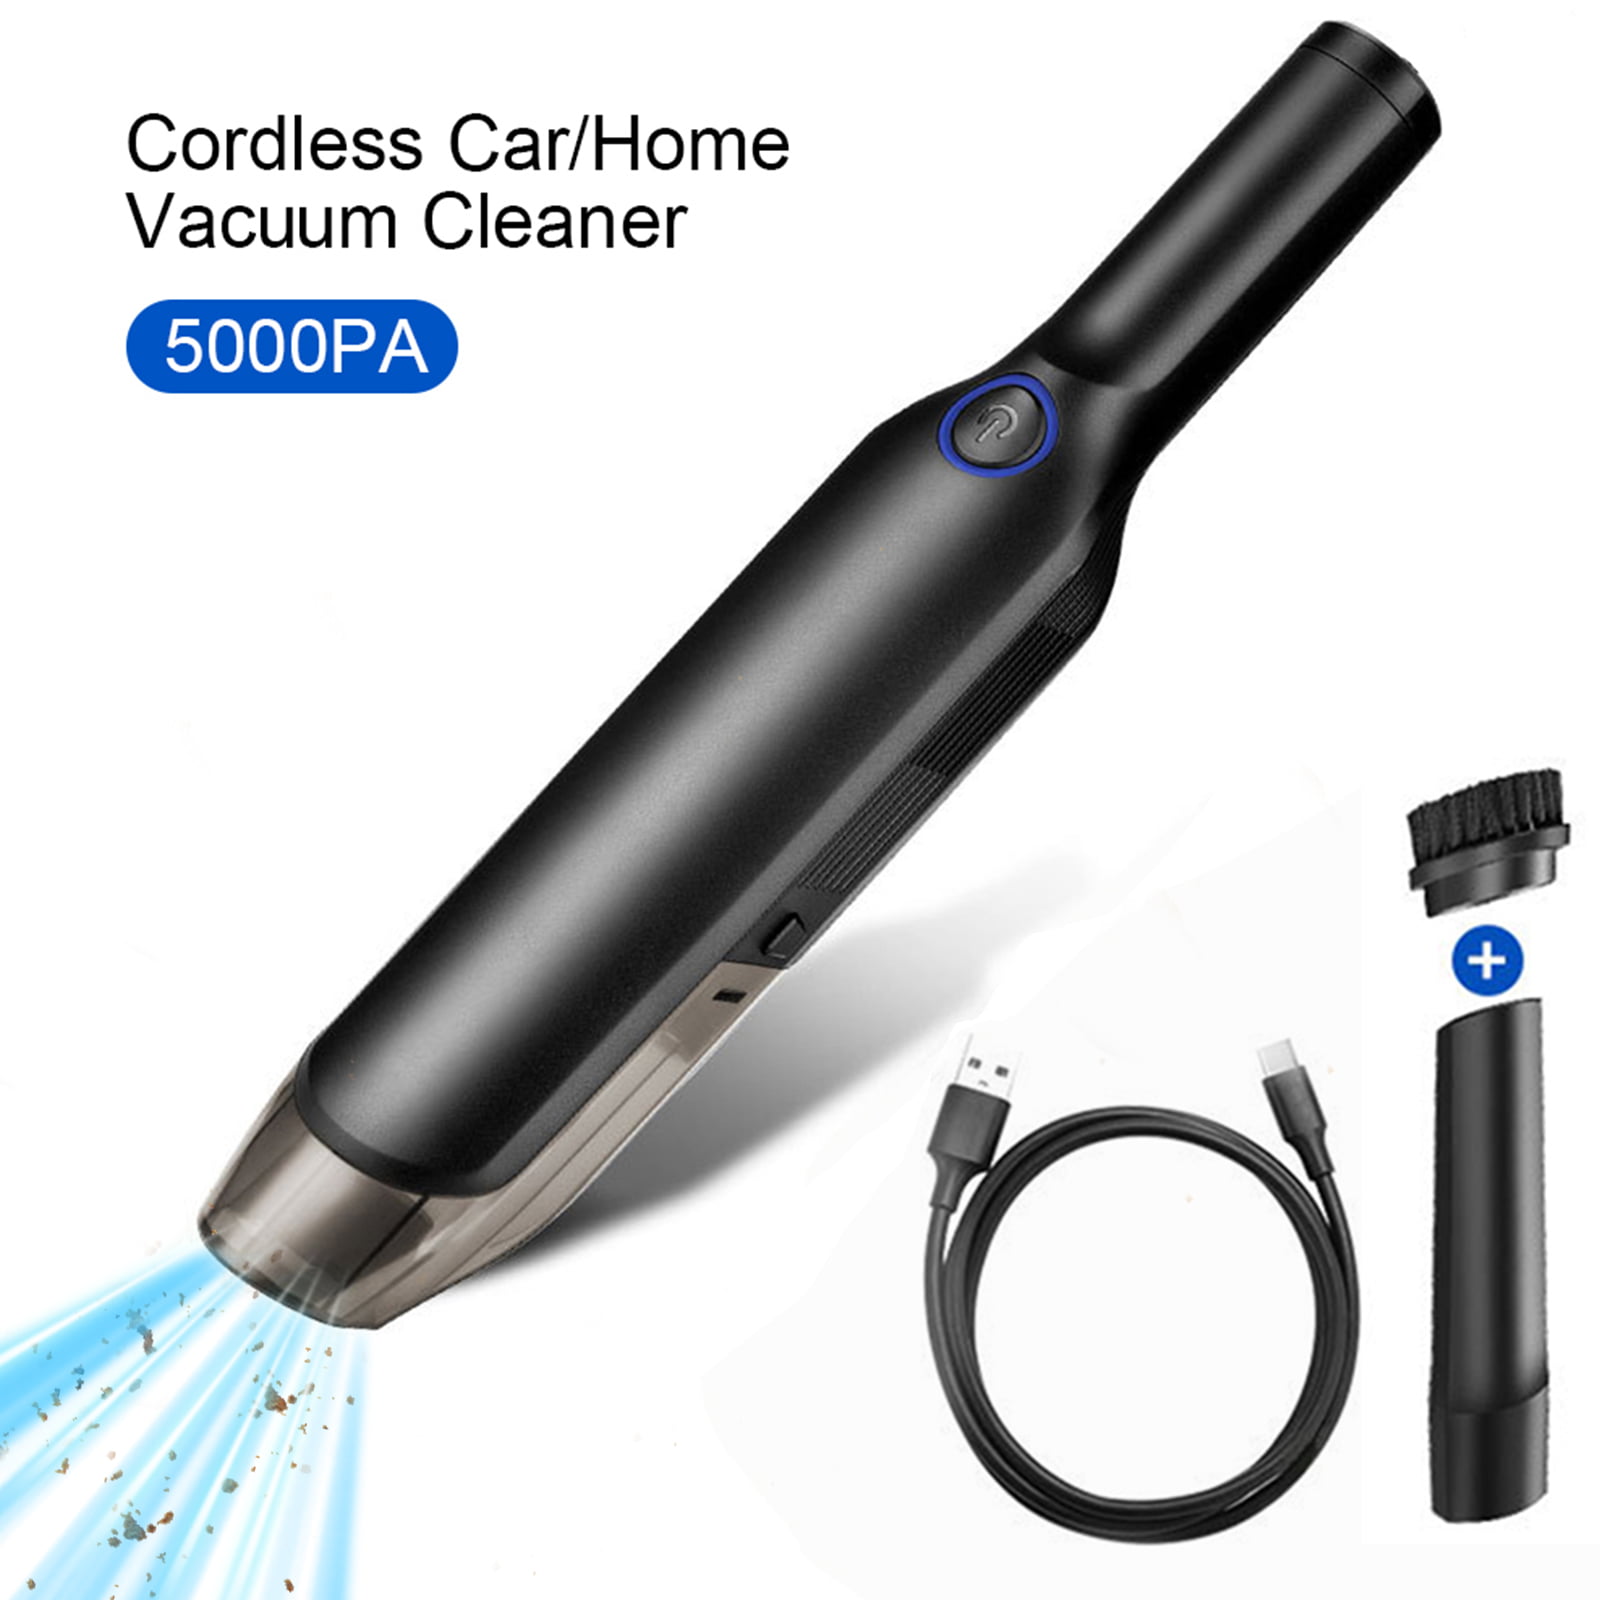 Cordless Portable Handheld Car Vacuum Cleaner 5000pa Wireless Auto Home Wet Dry 